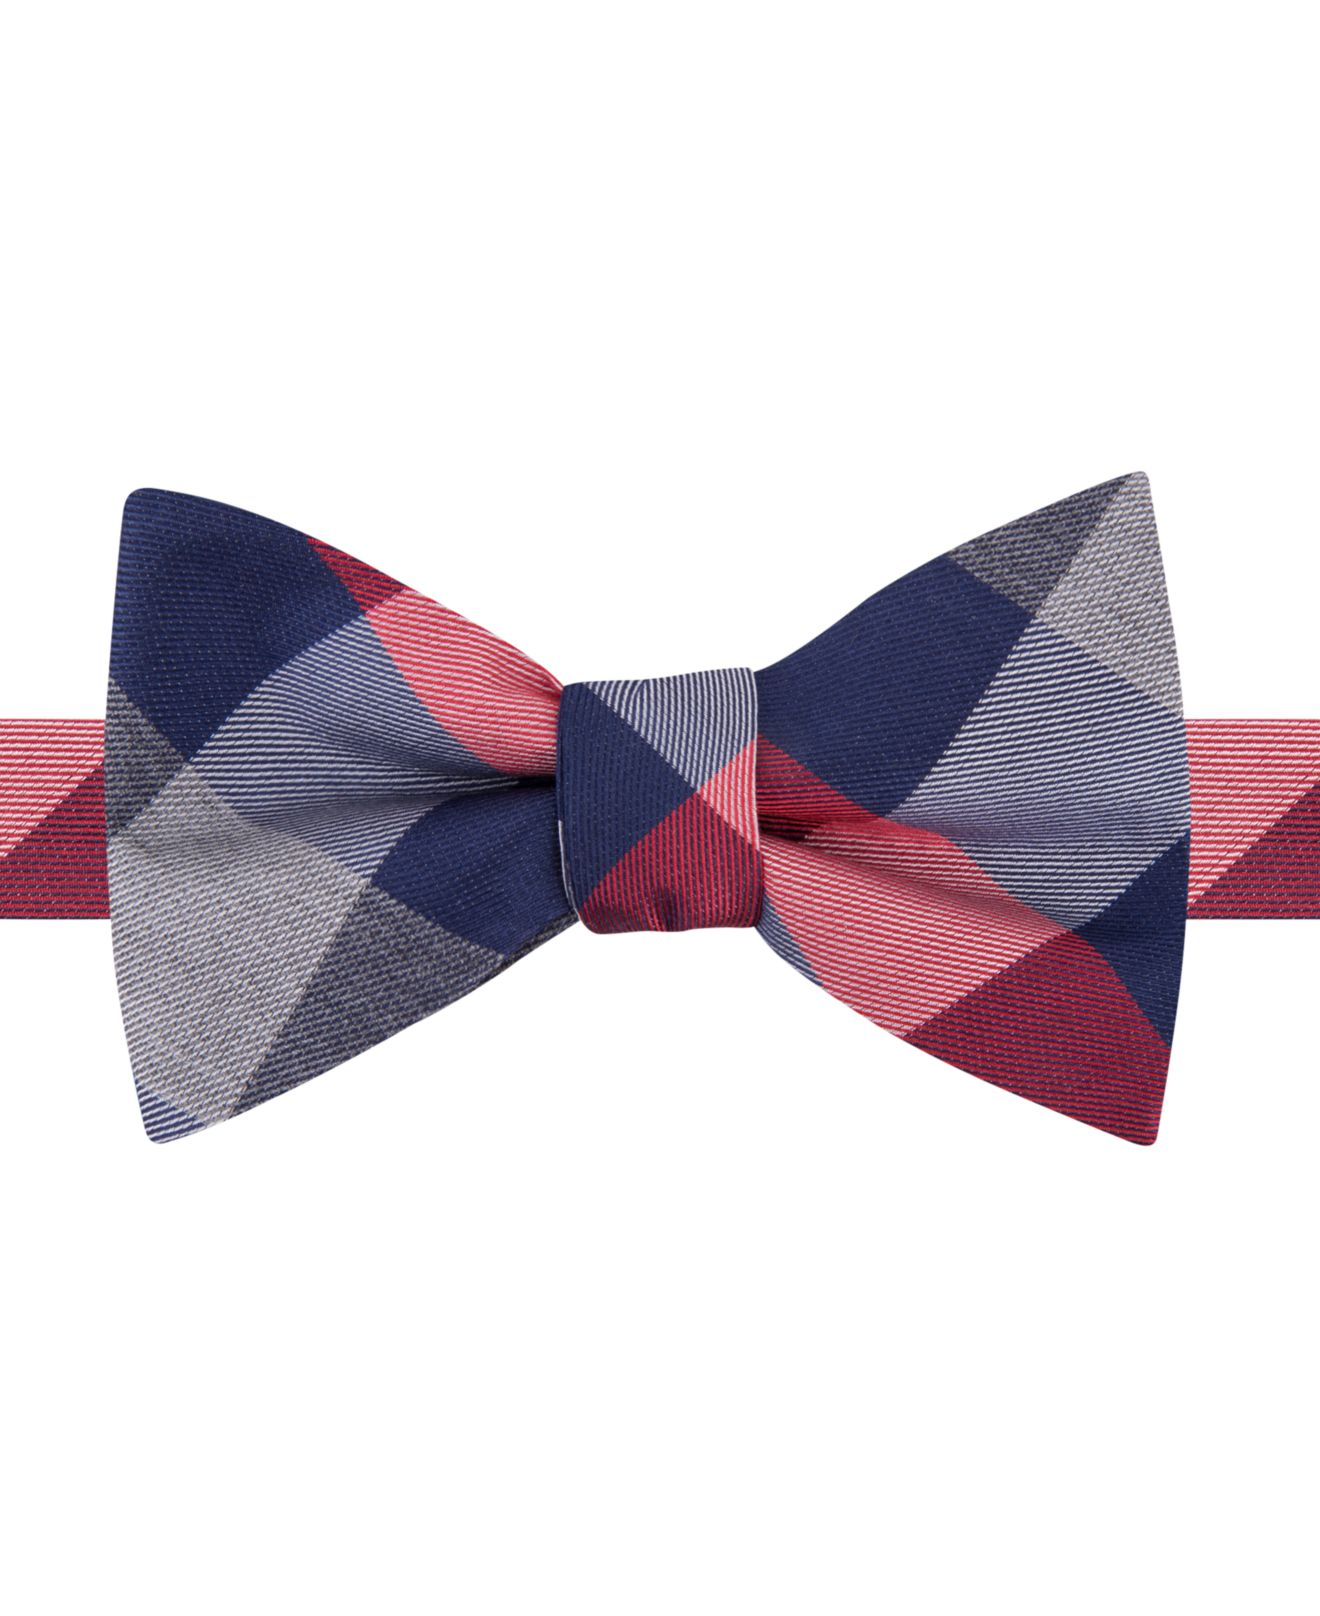 Lyst - Tommy Hilfiger Buffalo To-tie Bow Tie in Red for Men